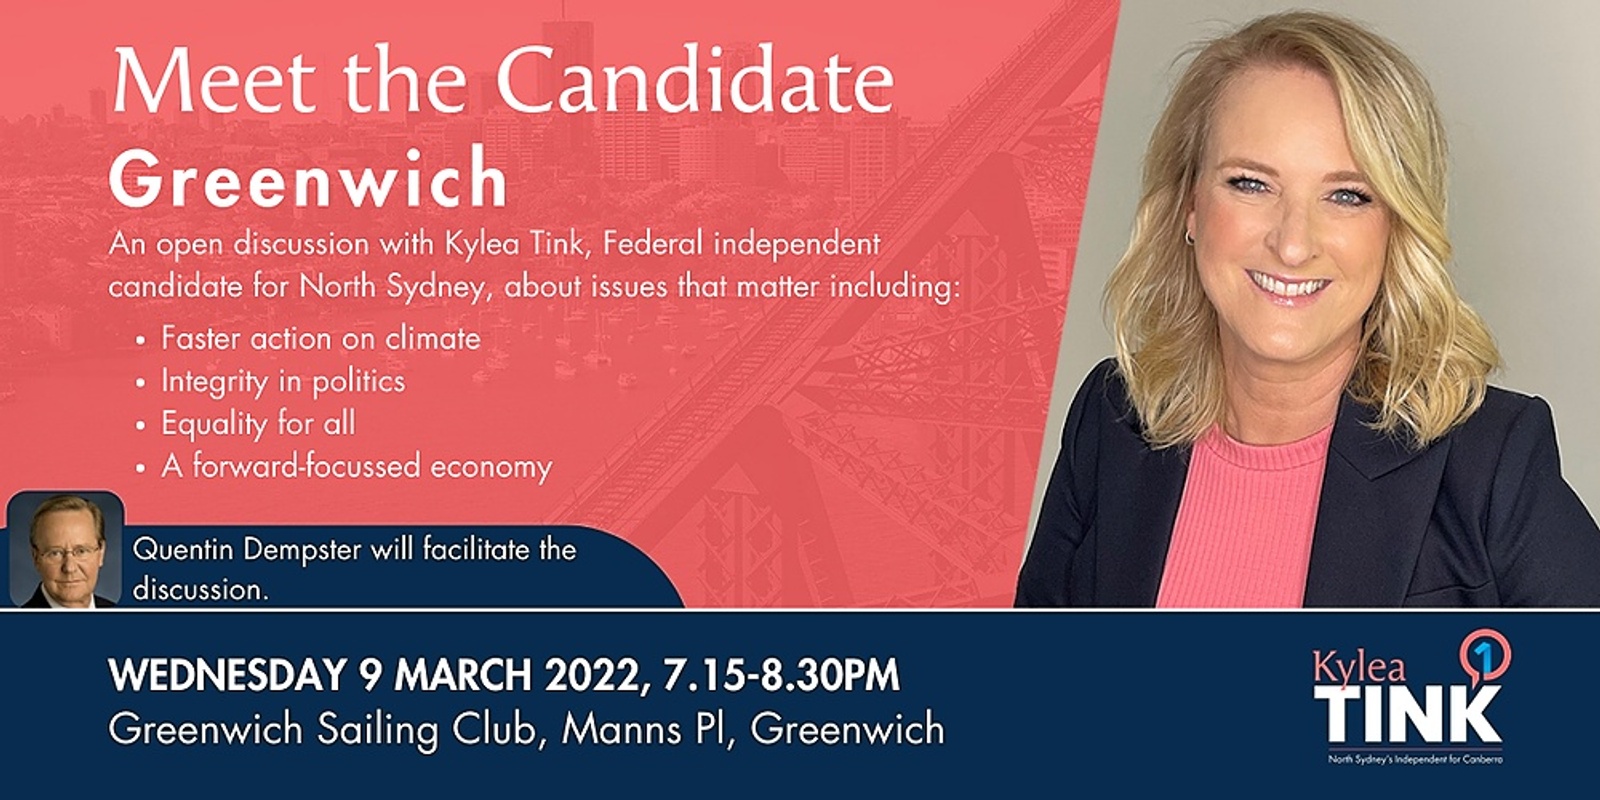 Banner image for Meet the Candidate - Greenwich: Kylea TINK, Federal Independent Candidate for North Sydney